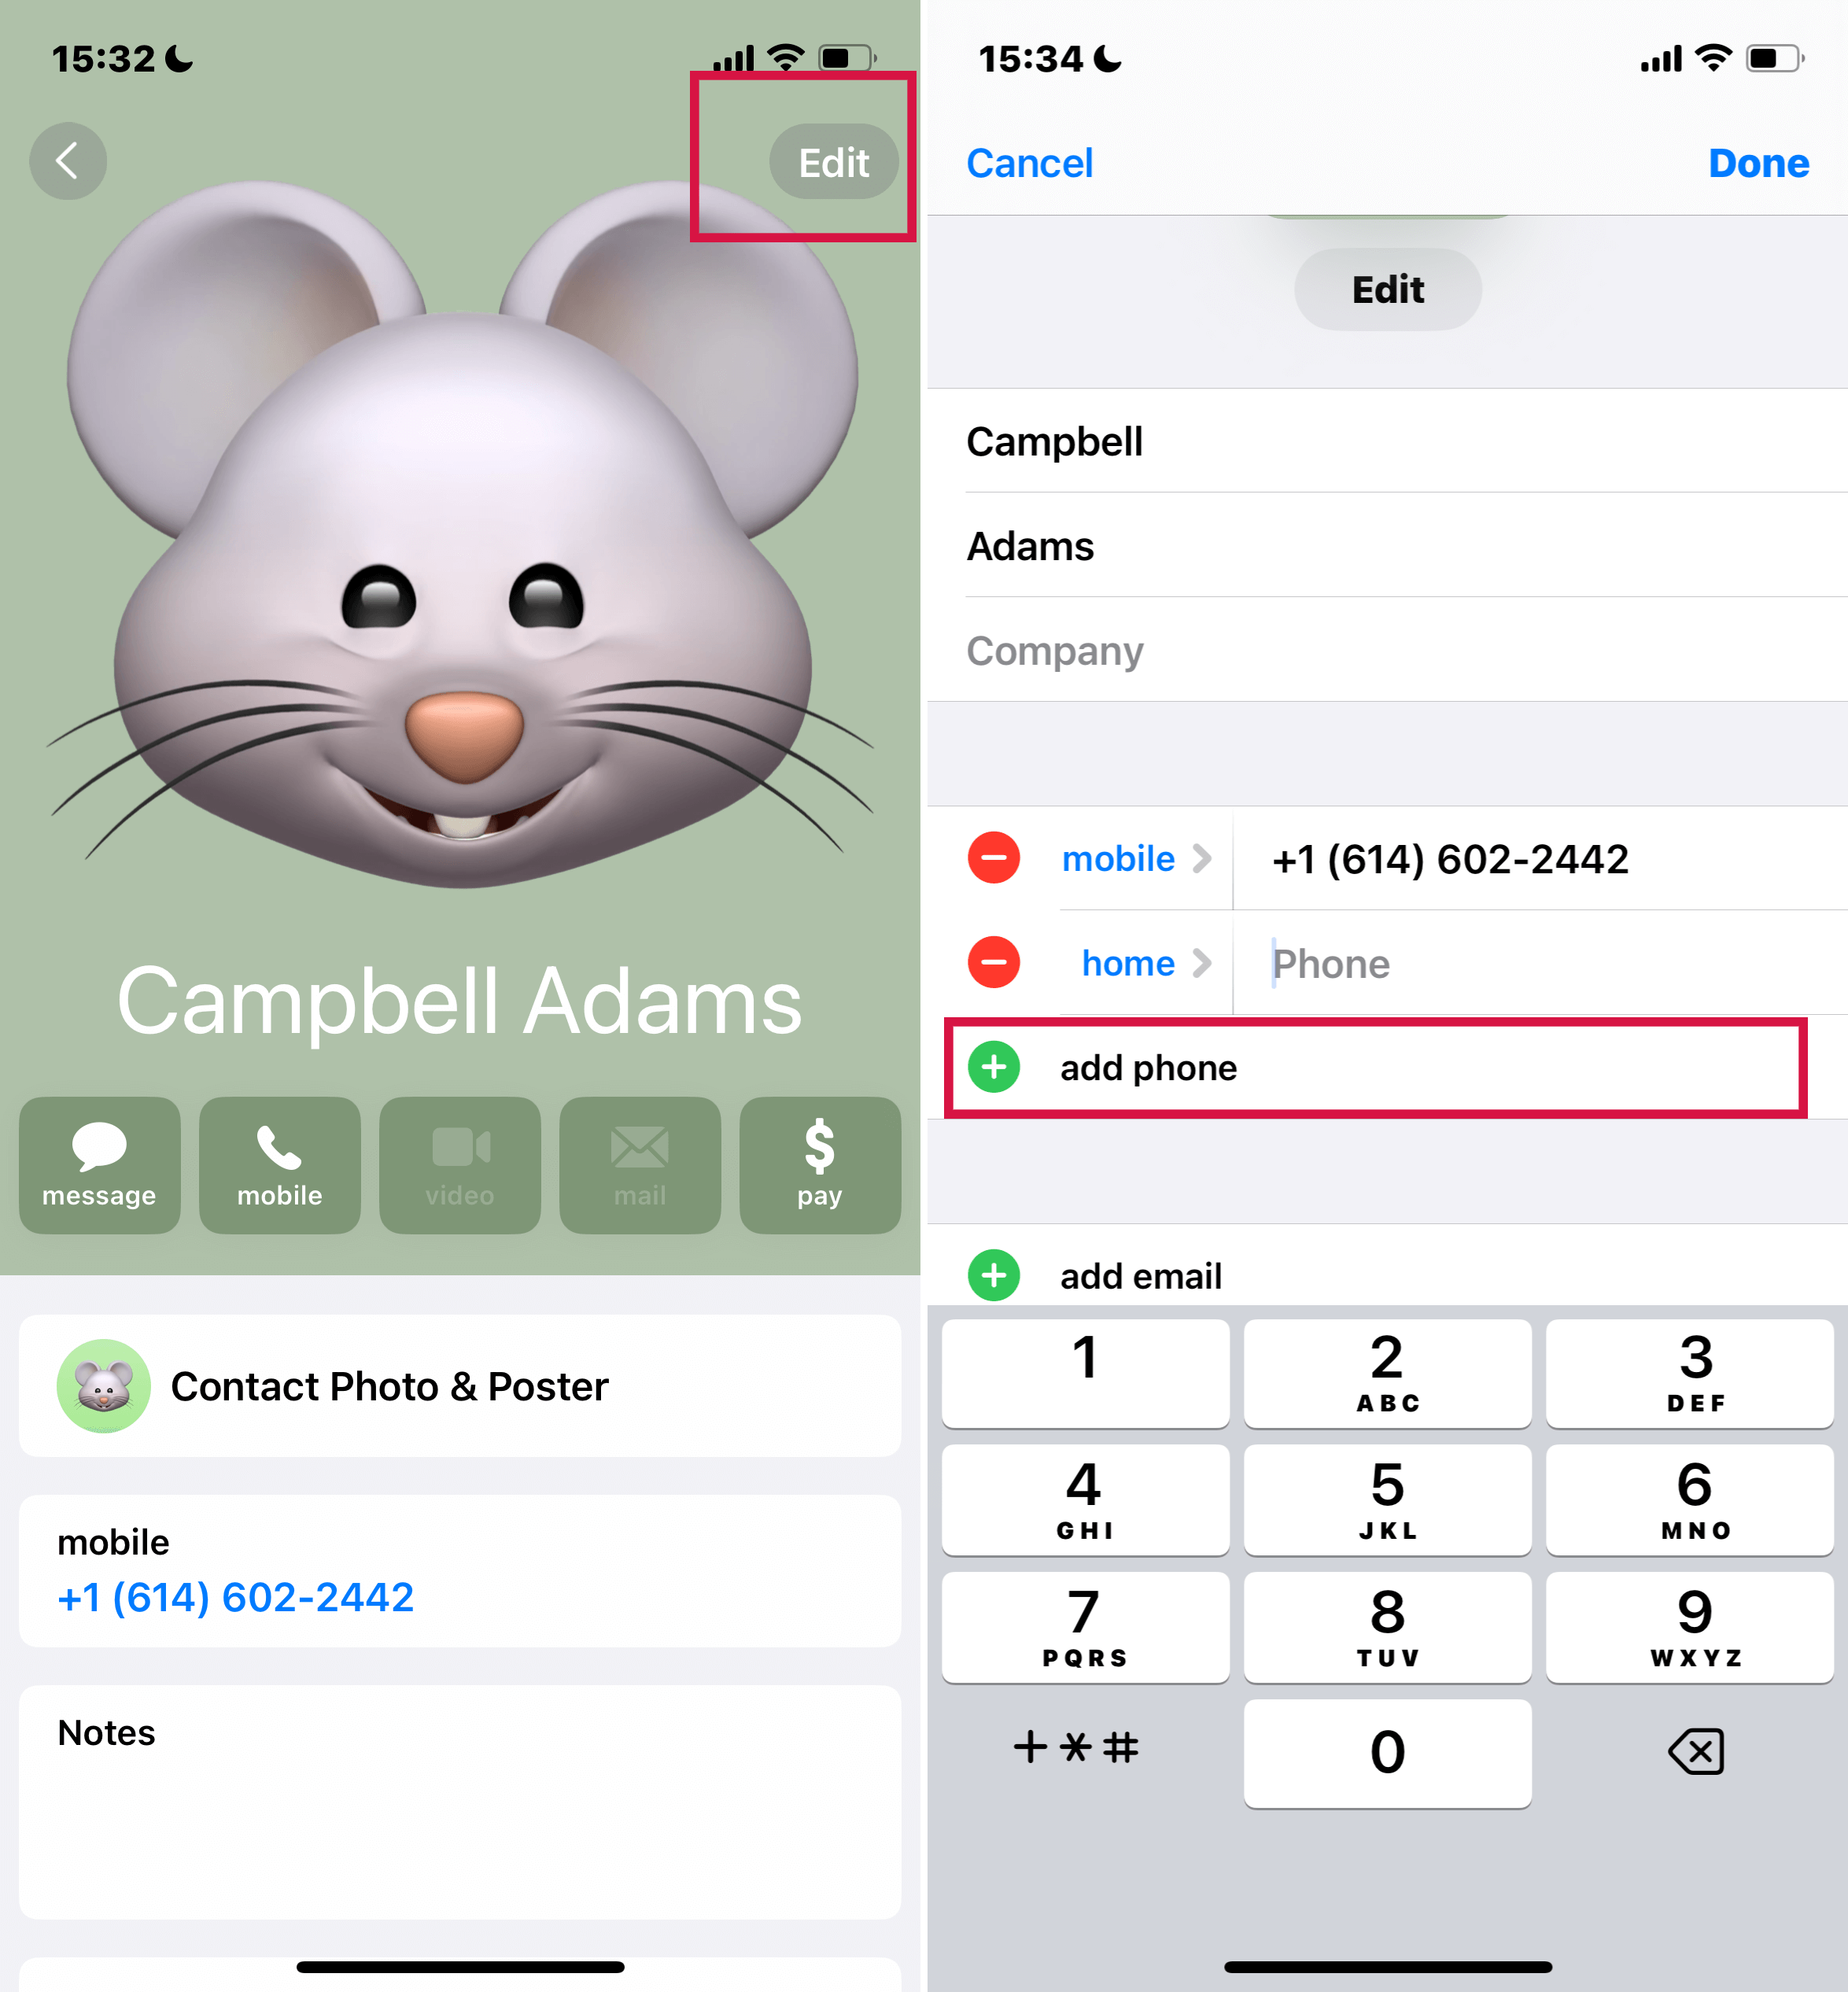 Iphone Contacts Edit Phone Number Add Phone